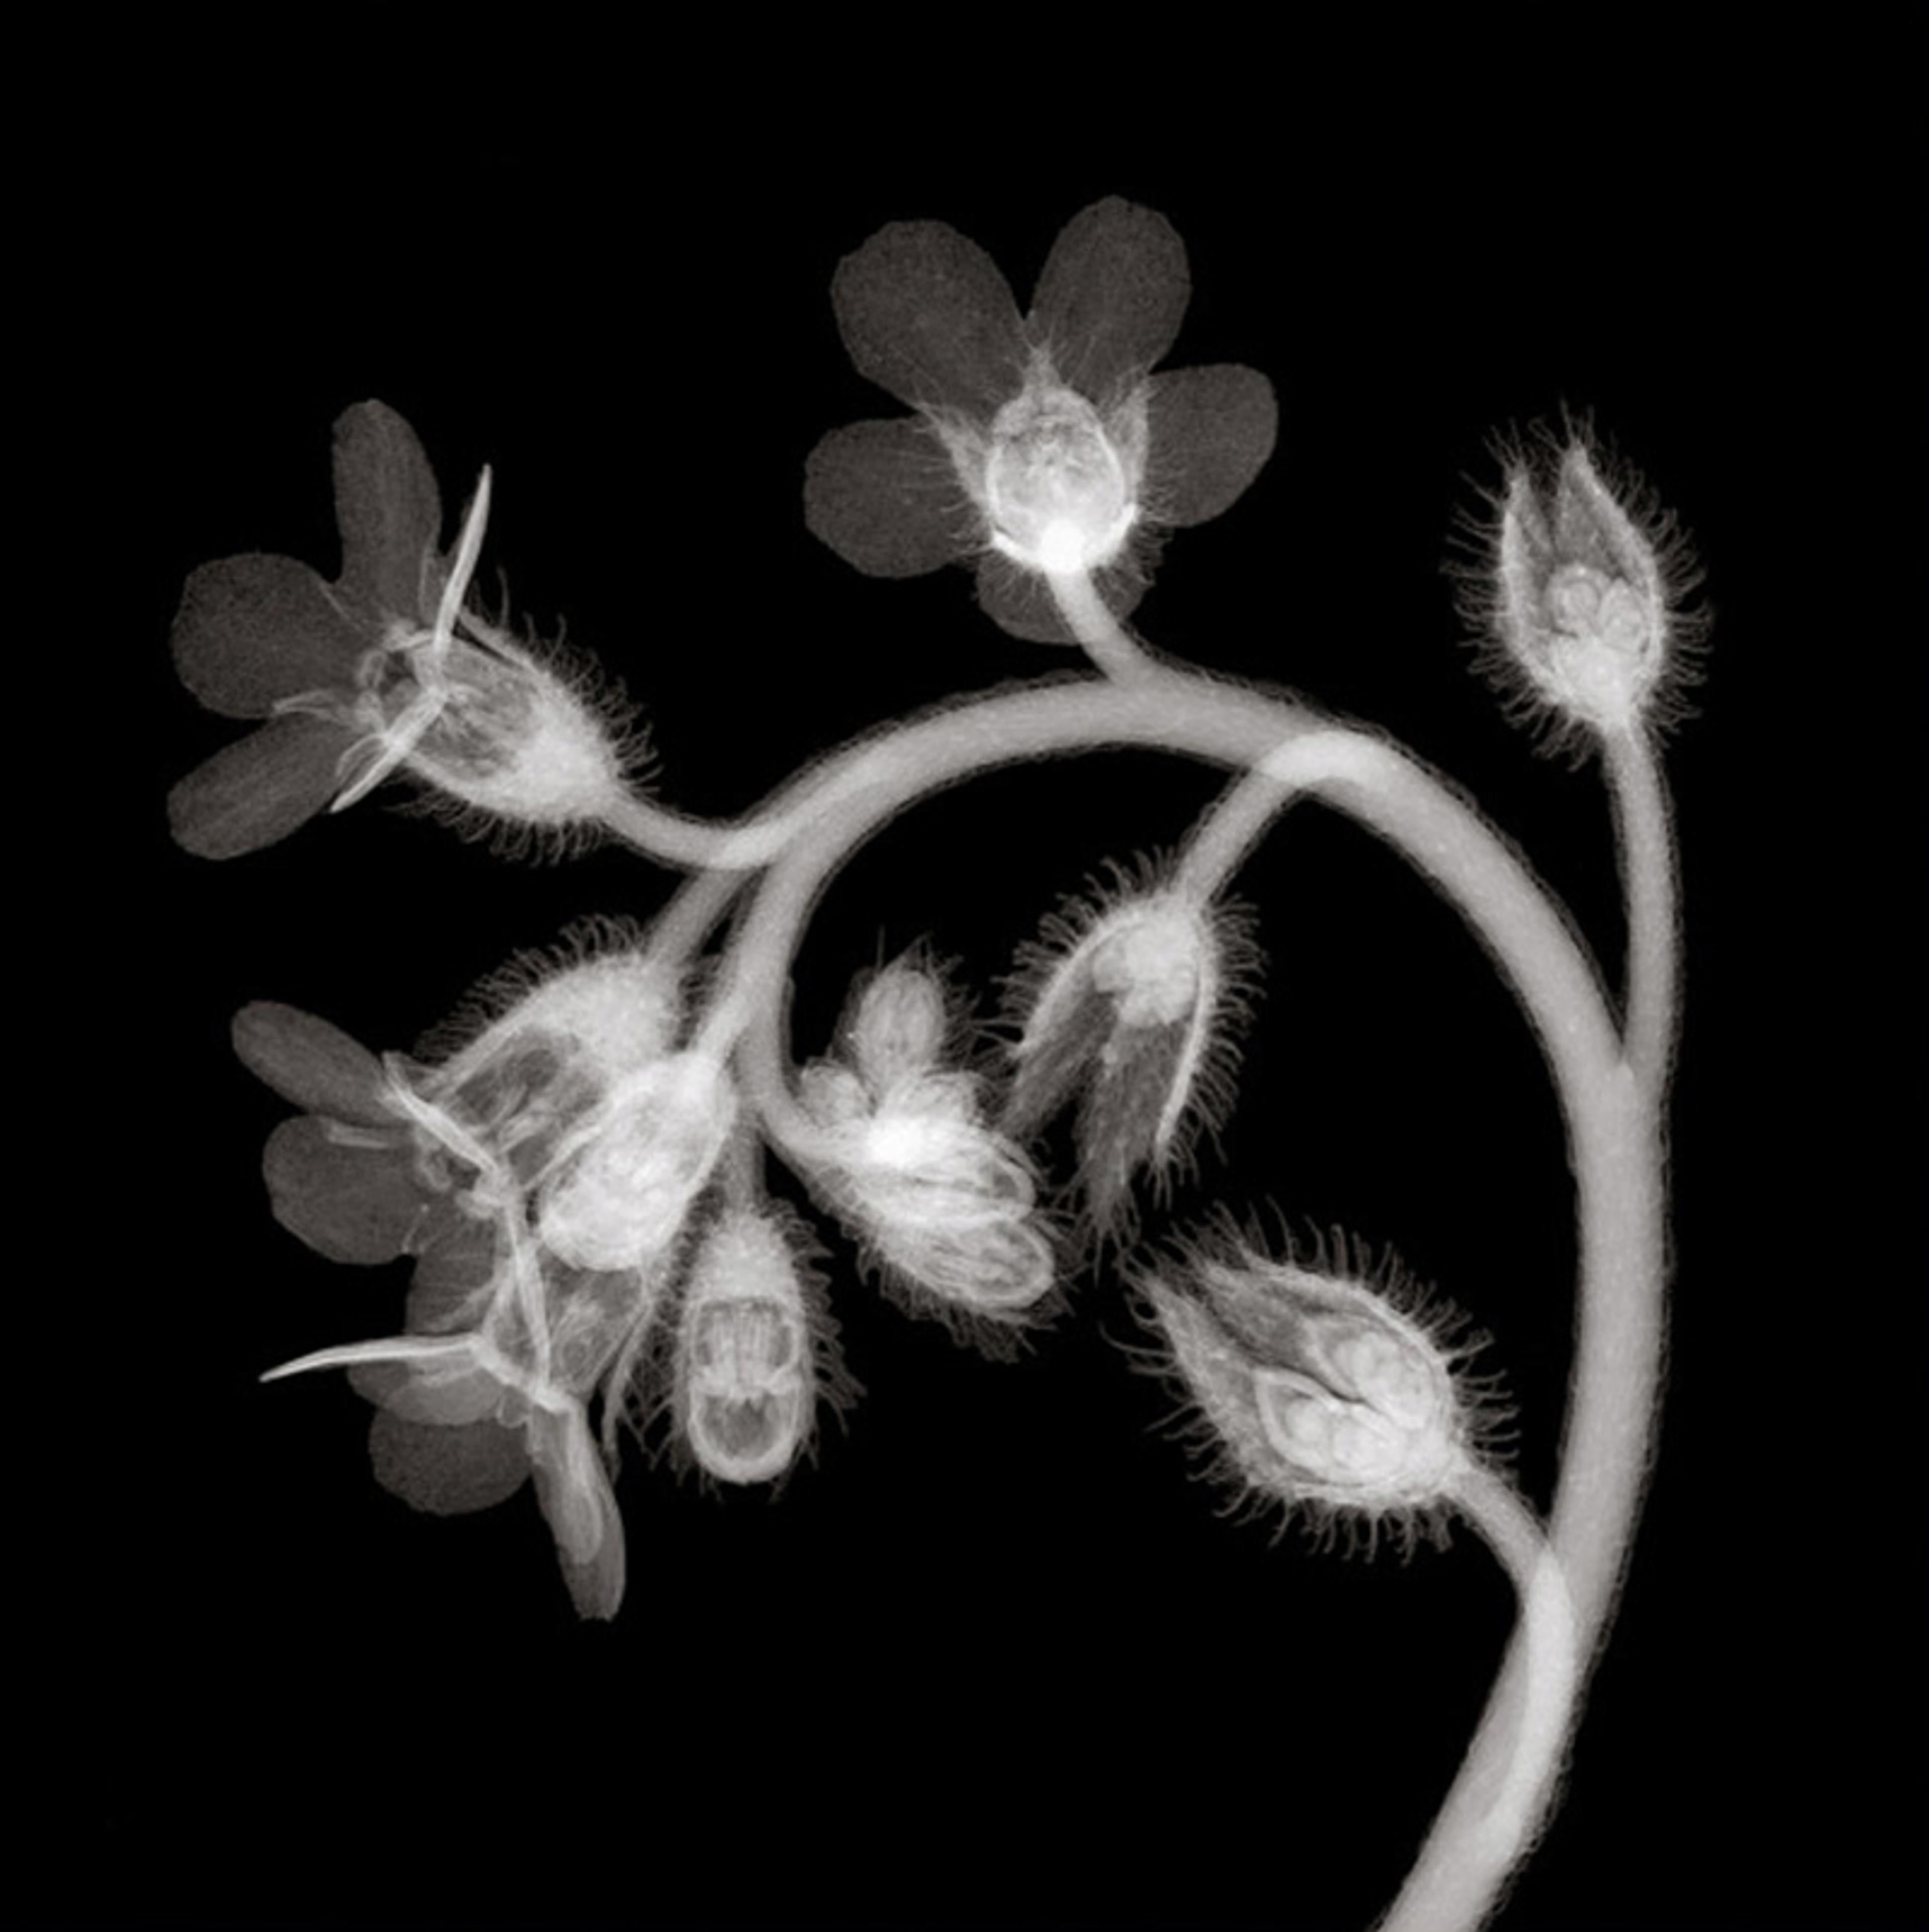 X-ray image of a flower with multiple buds and blossoms against a black background, showing intricate details of the petals and stalks.